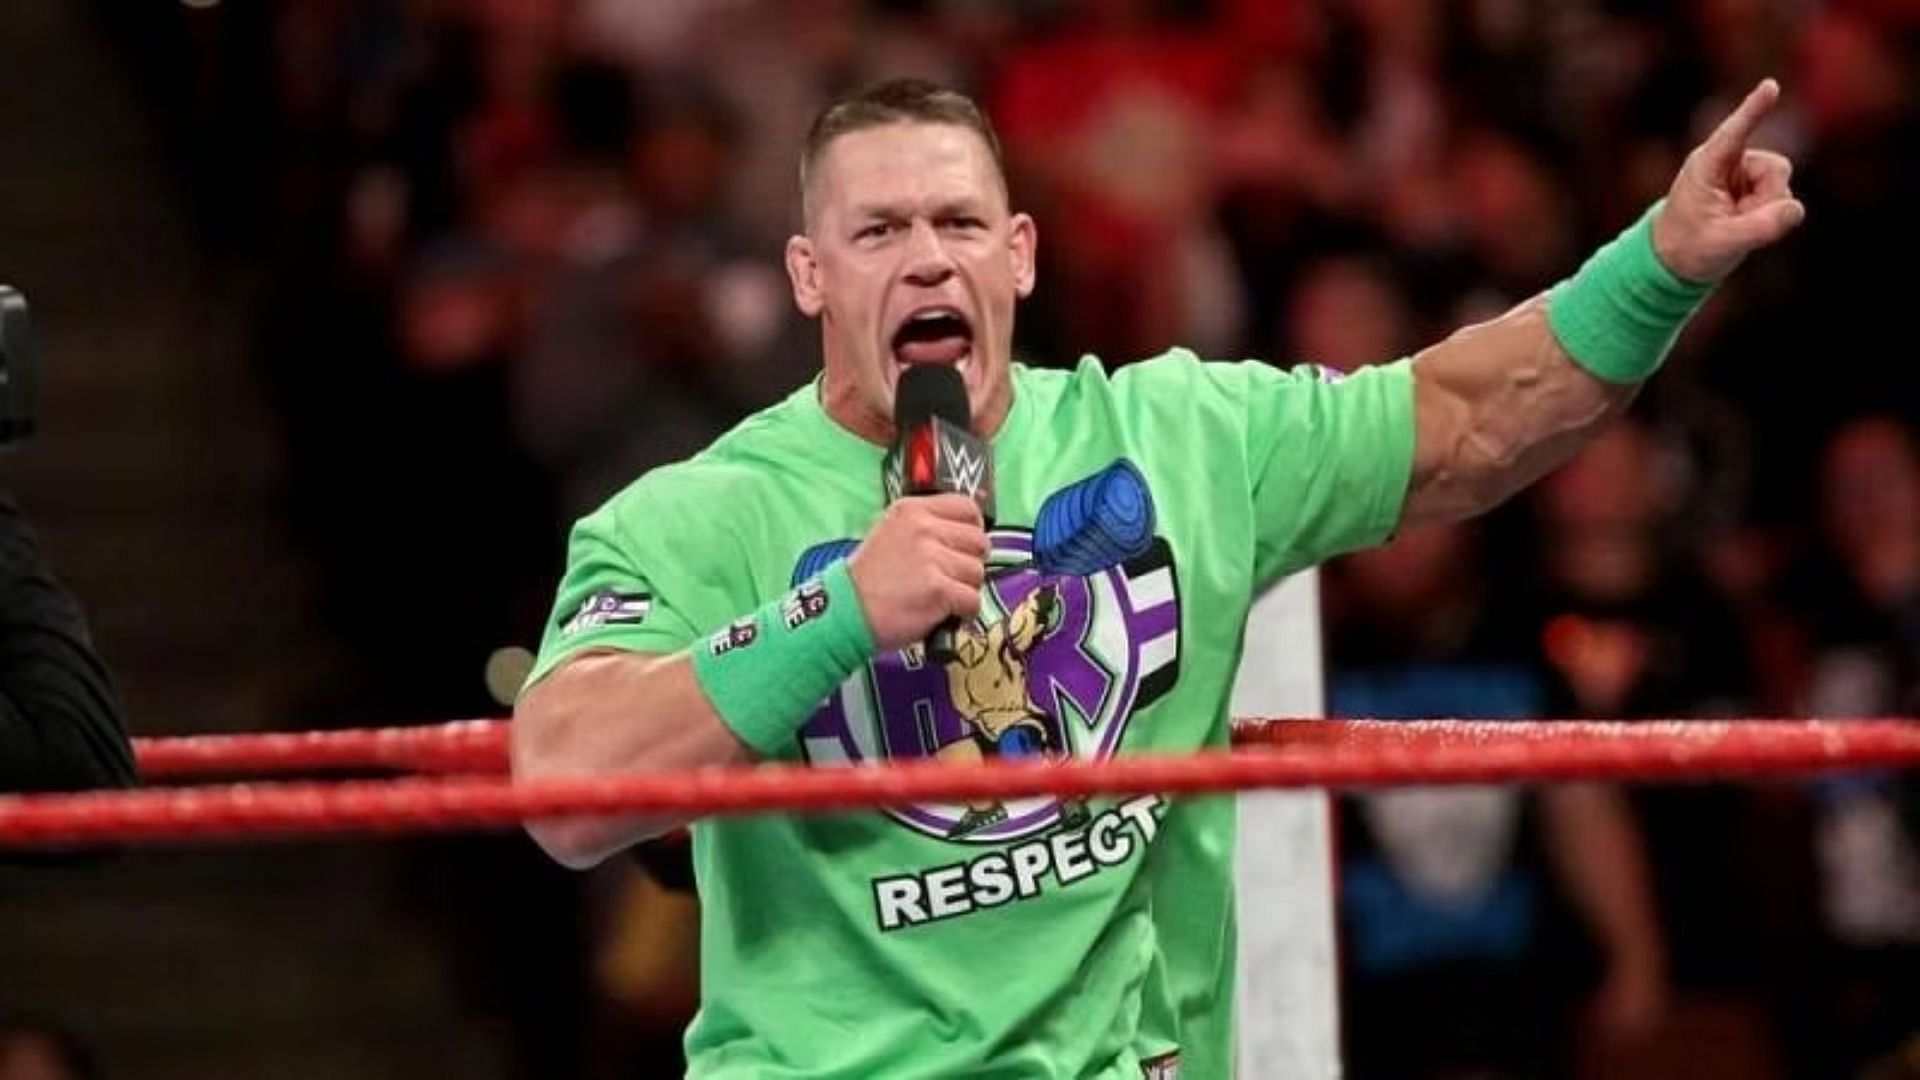 John Cena finally will be home among WWE fans in Hyderabad, India.